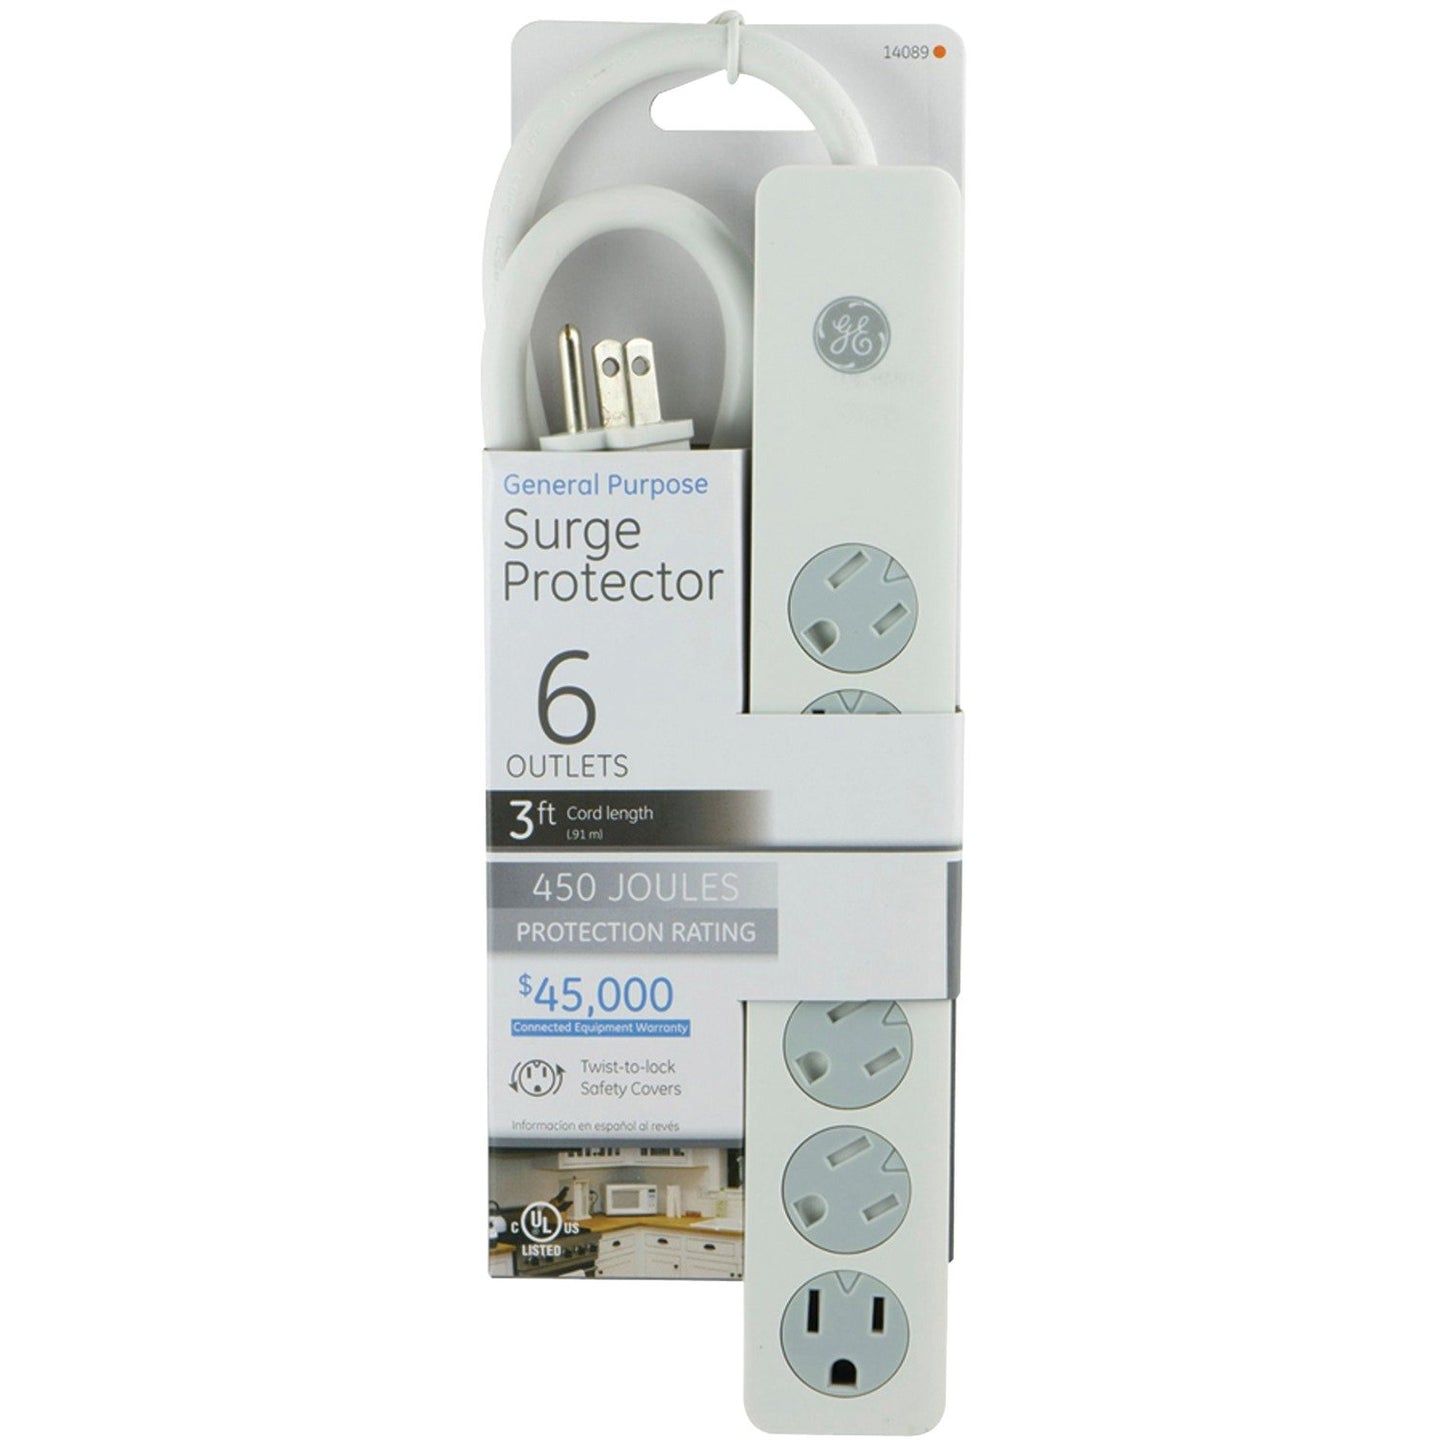 GE 14089 6-Outlet Surge Protector (3ft; White)